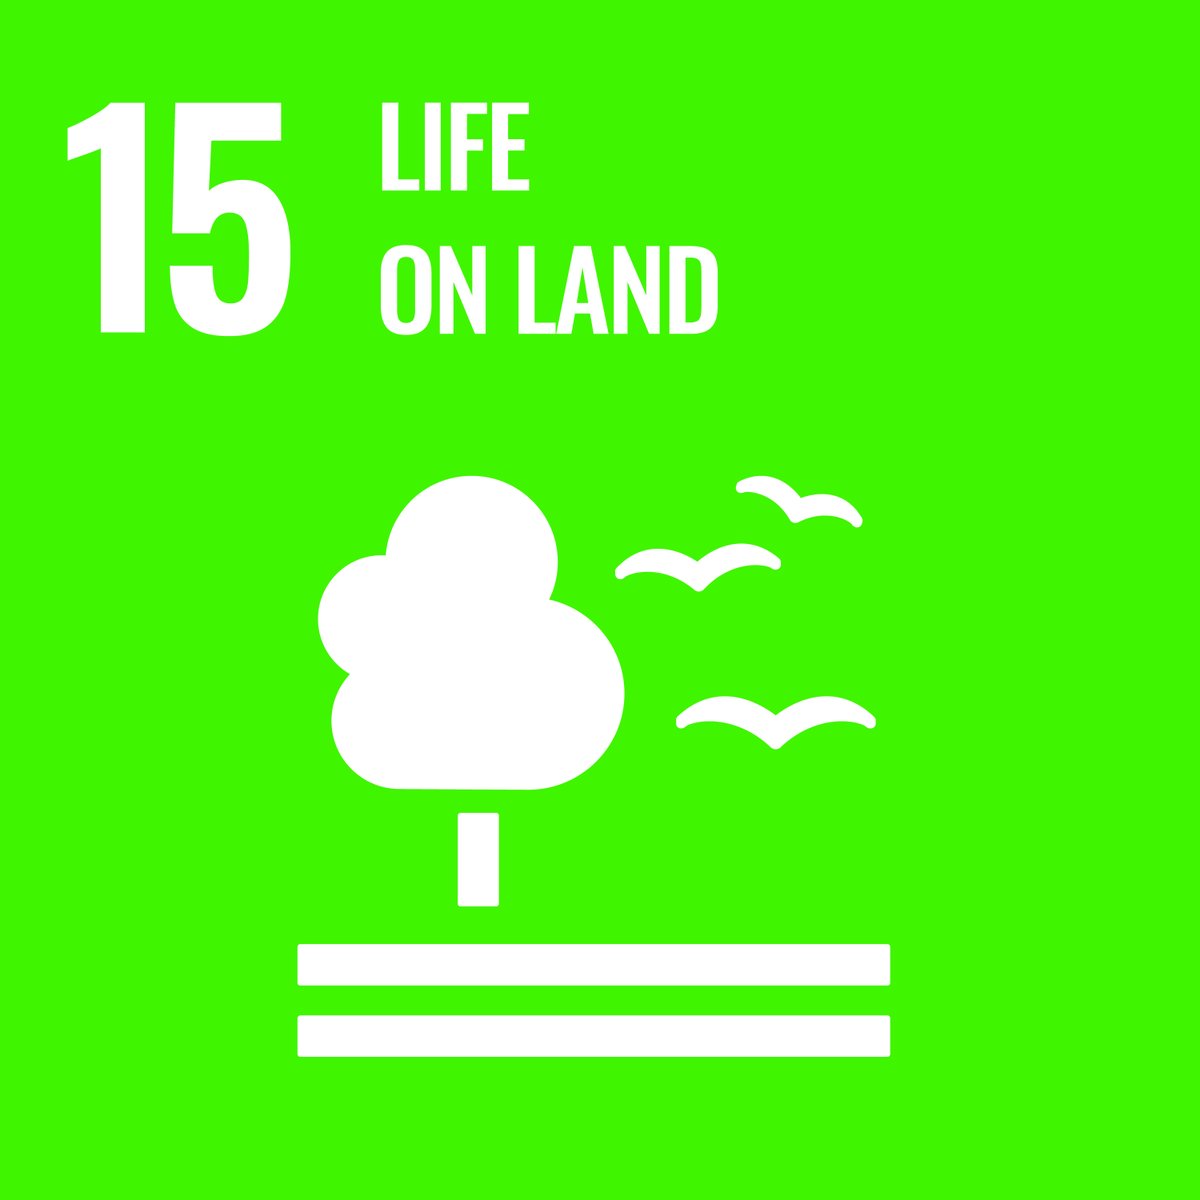 The world is facing a triple crisis of #climatechange, #pollution & #biodiversity loss. 🌍 #SDG15 – Life on Land – is @UN's Goal of the Month. At the #OPECFund, we're committed to partnering for SDG15's success!
🔗 Learn more about the Goal of the Month: bit.ly/3AsQa0G